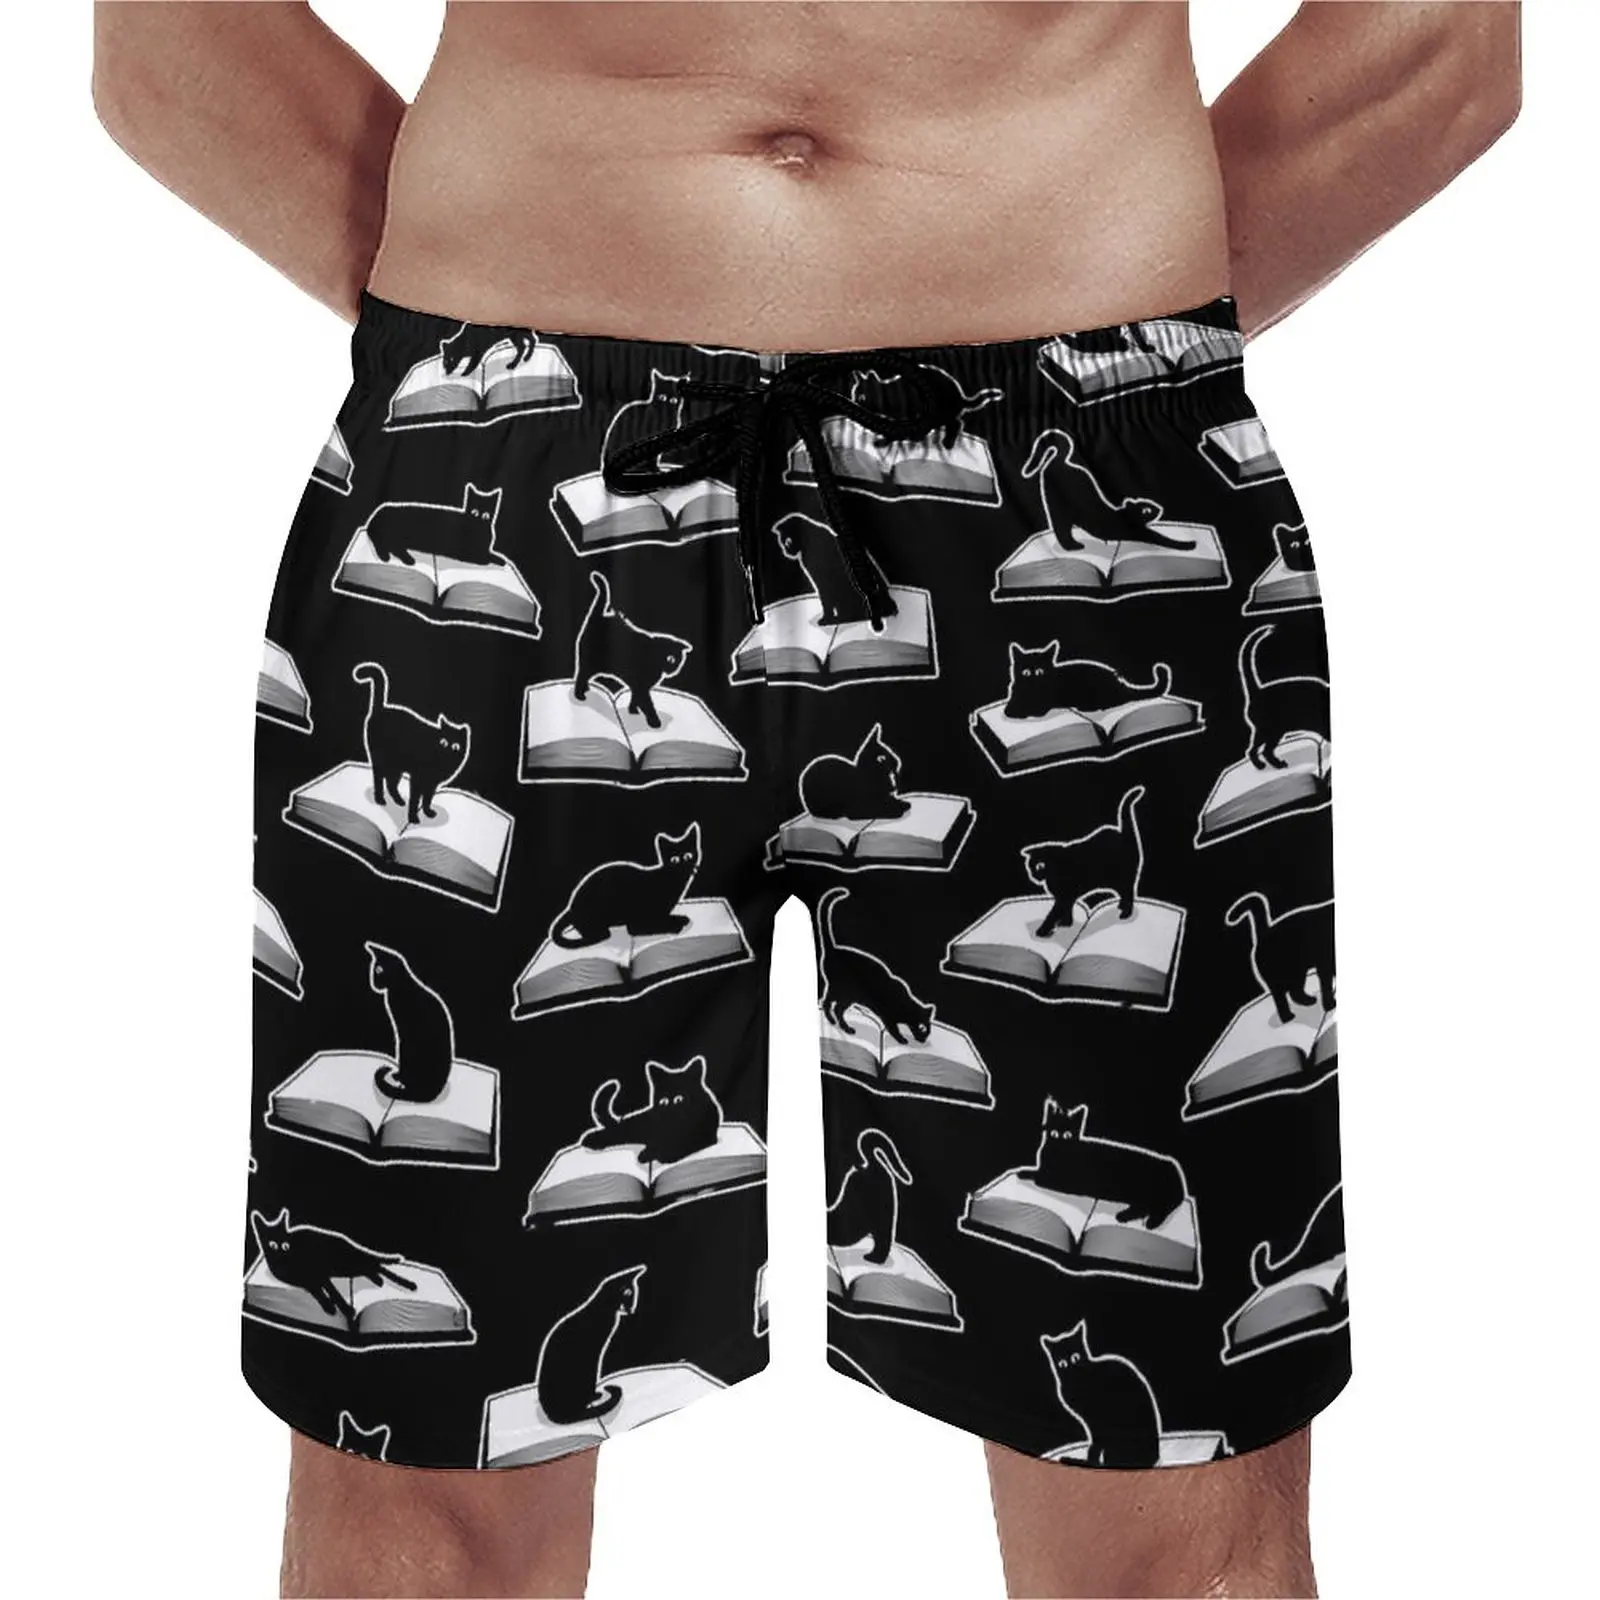 

Summer Board Shorts Library Cats Running Surf Books Print Design Beach Short Pants Classic Comfortable Swimming Trunks Plus Size